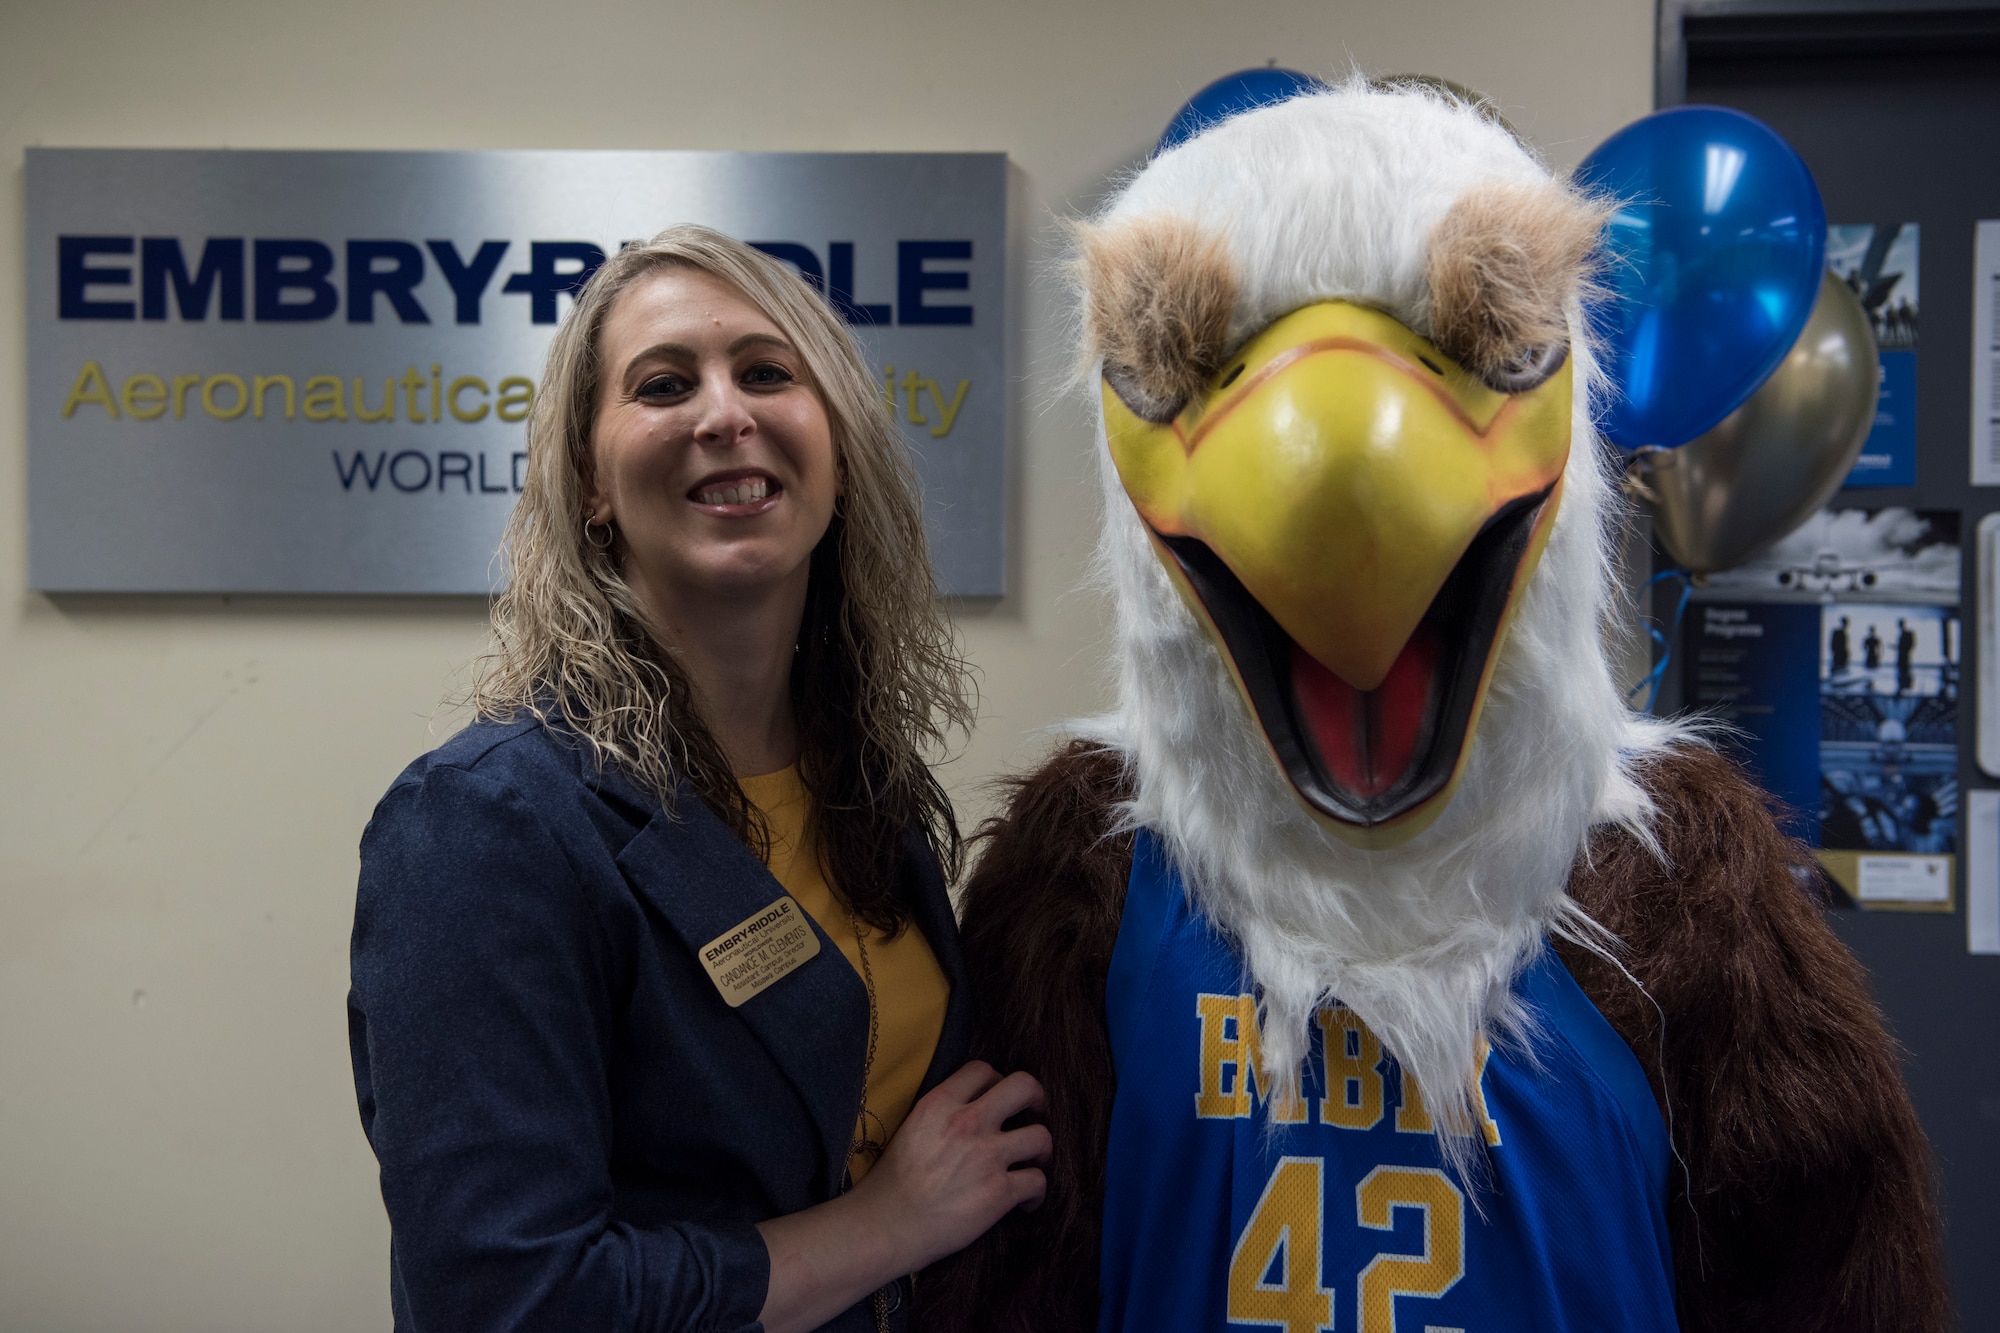 Candance Clements, left, the Misawa Embry-Riddle Aeronautical University assistant campus director, pauses for a photo during the ERAU grand re-opening with the school’s mascot, right, at Misawa Air Base, Japan, March 13, 2019. The institution offers nine-week courses focusing on aeronautics, aviation maintenance, aviation business administration, aviation security, unmanned systems applications and human factors. (U.S. Air Force photo by Airman 1st Class Collette Brooks)